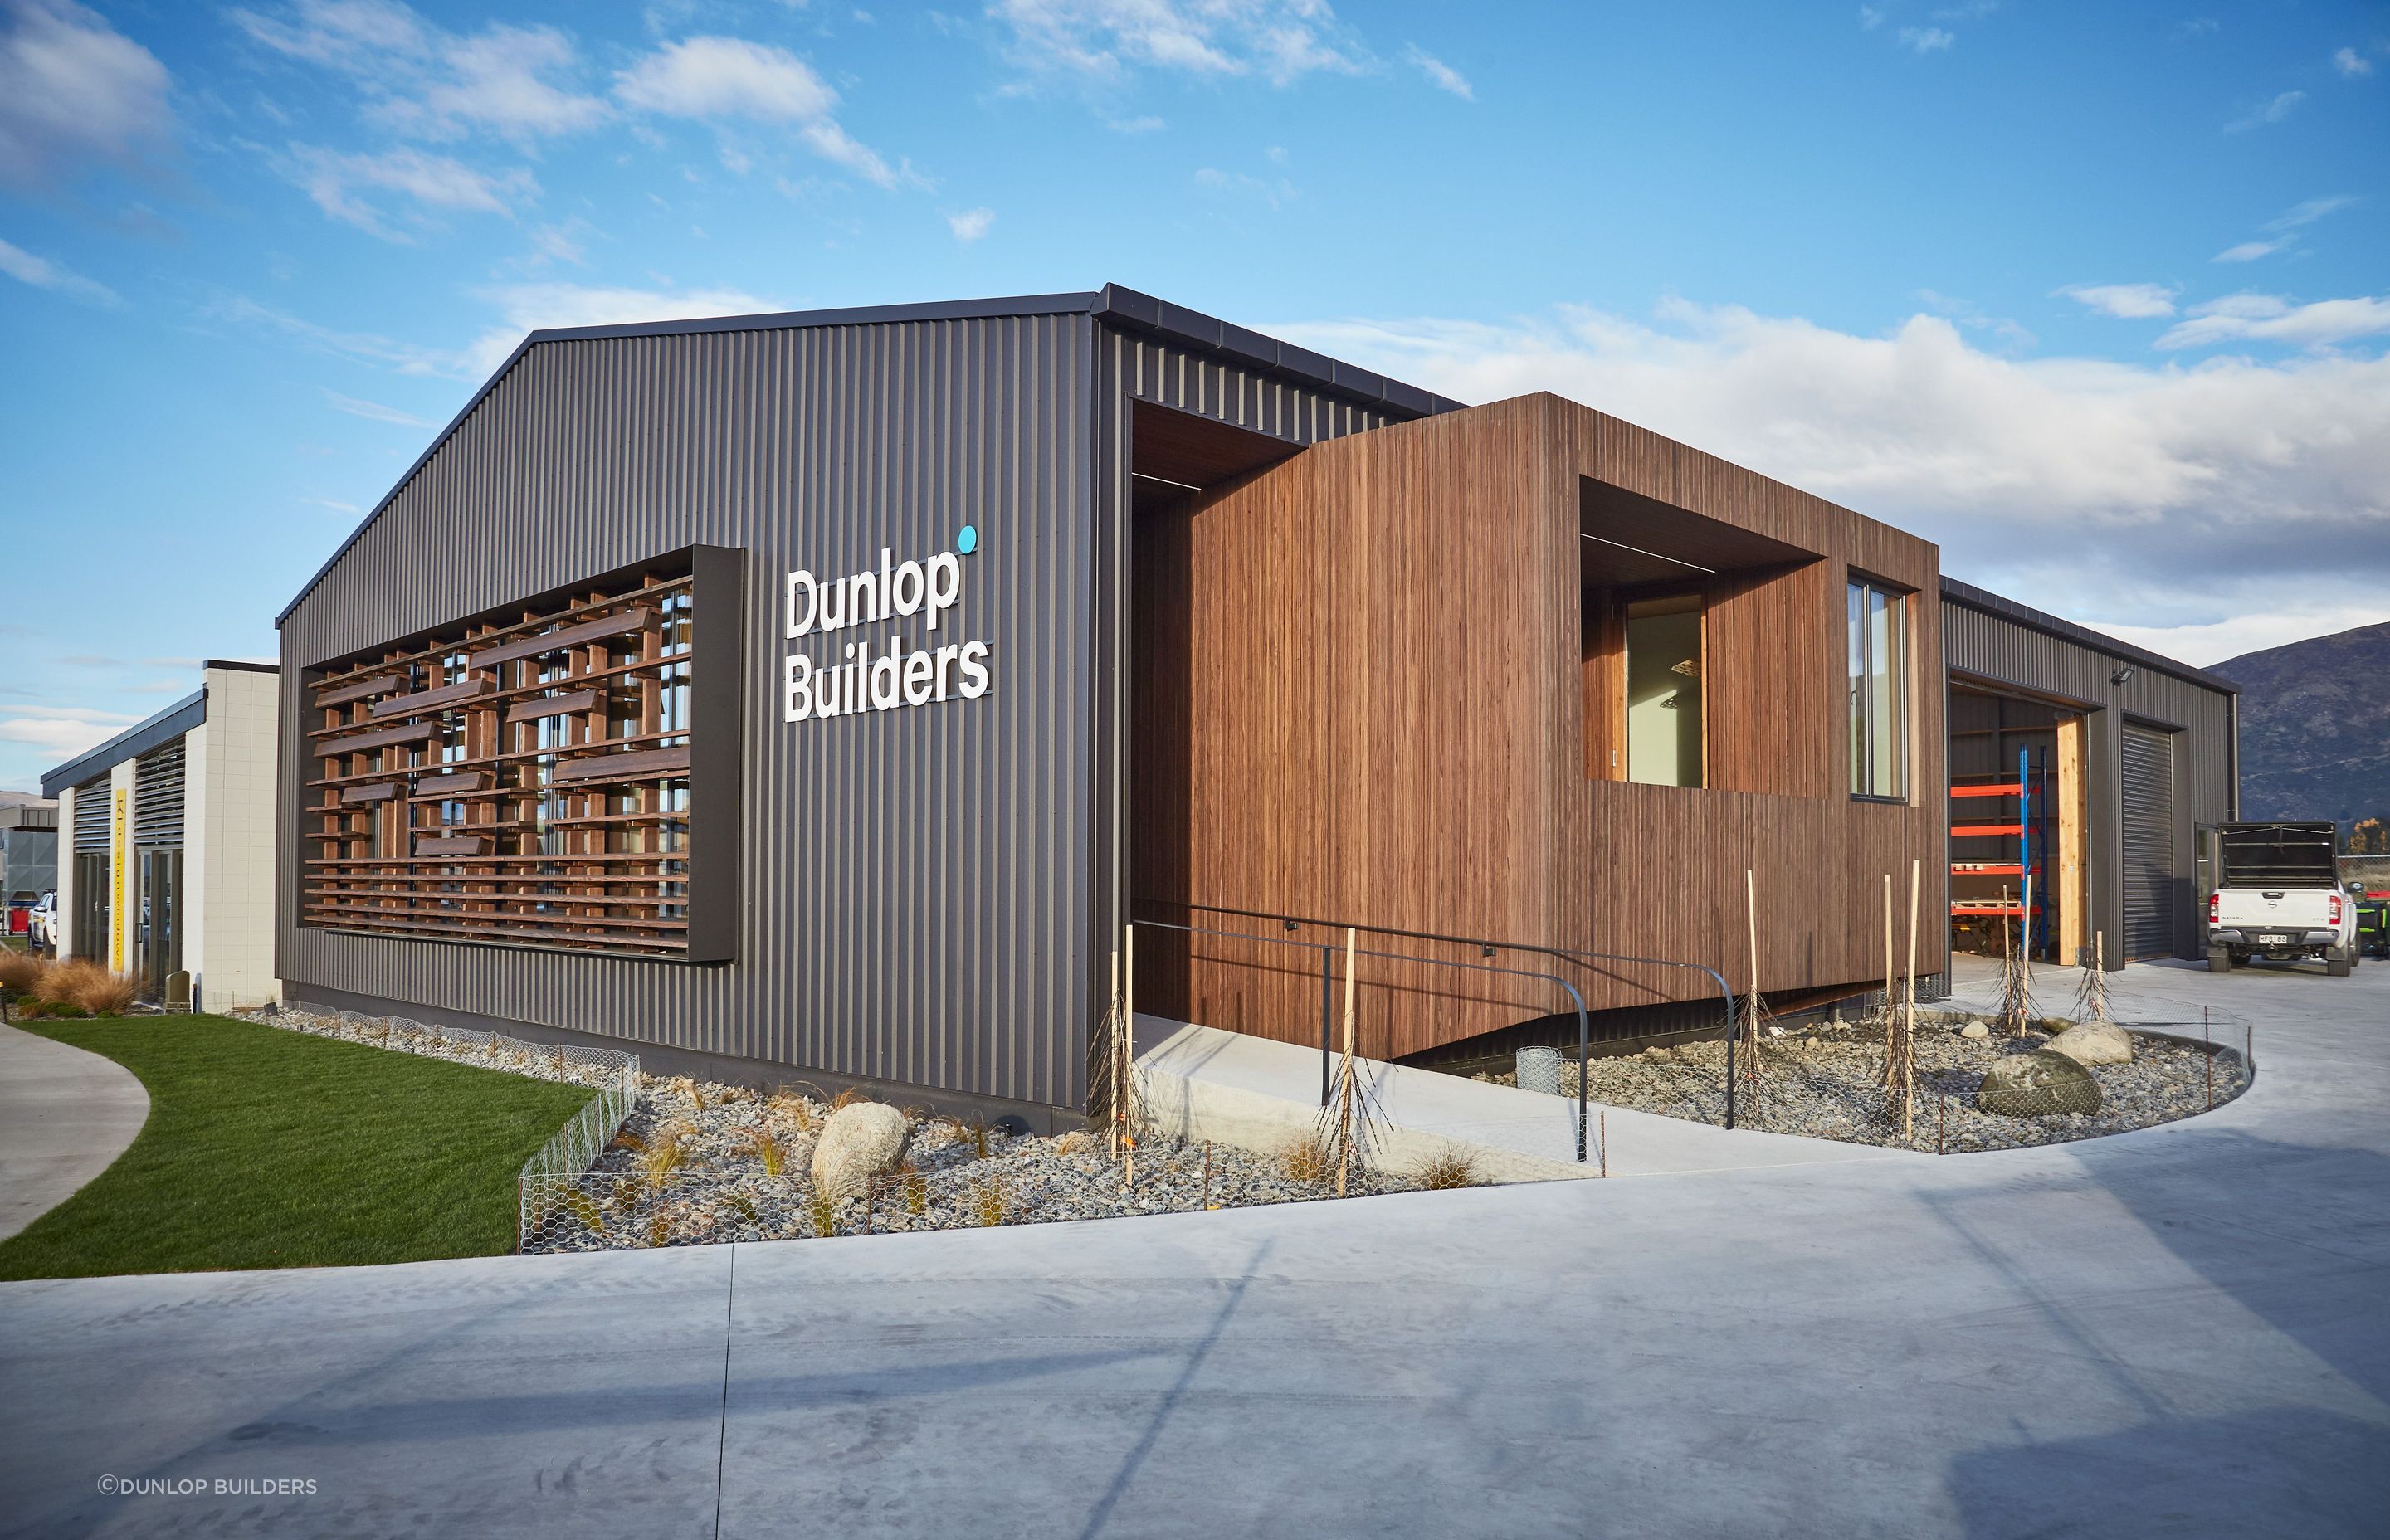 VIA architecture's energy modelling services enabled the Dunlop Hub to be the first certified Passive House office building in New Zealand.